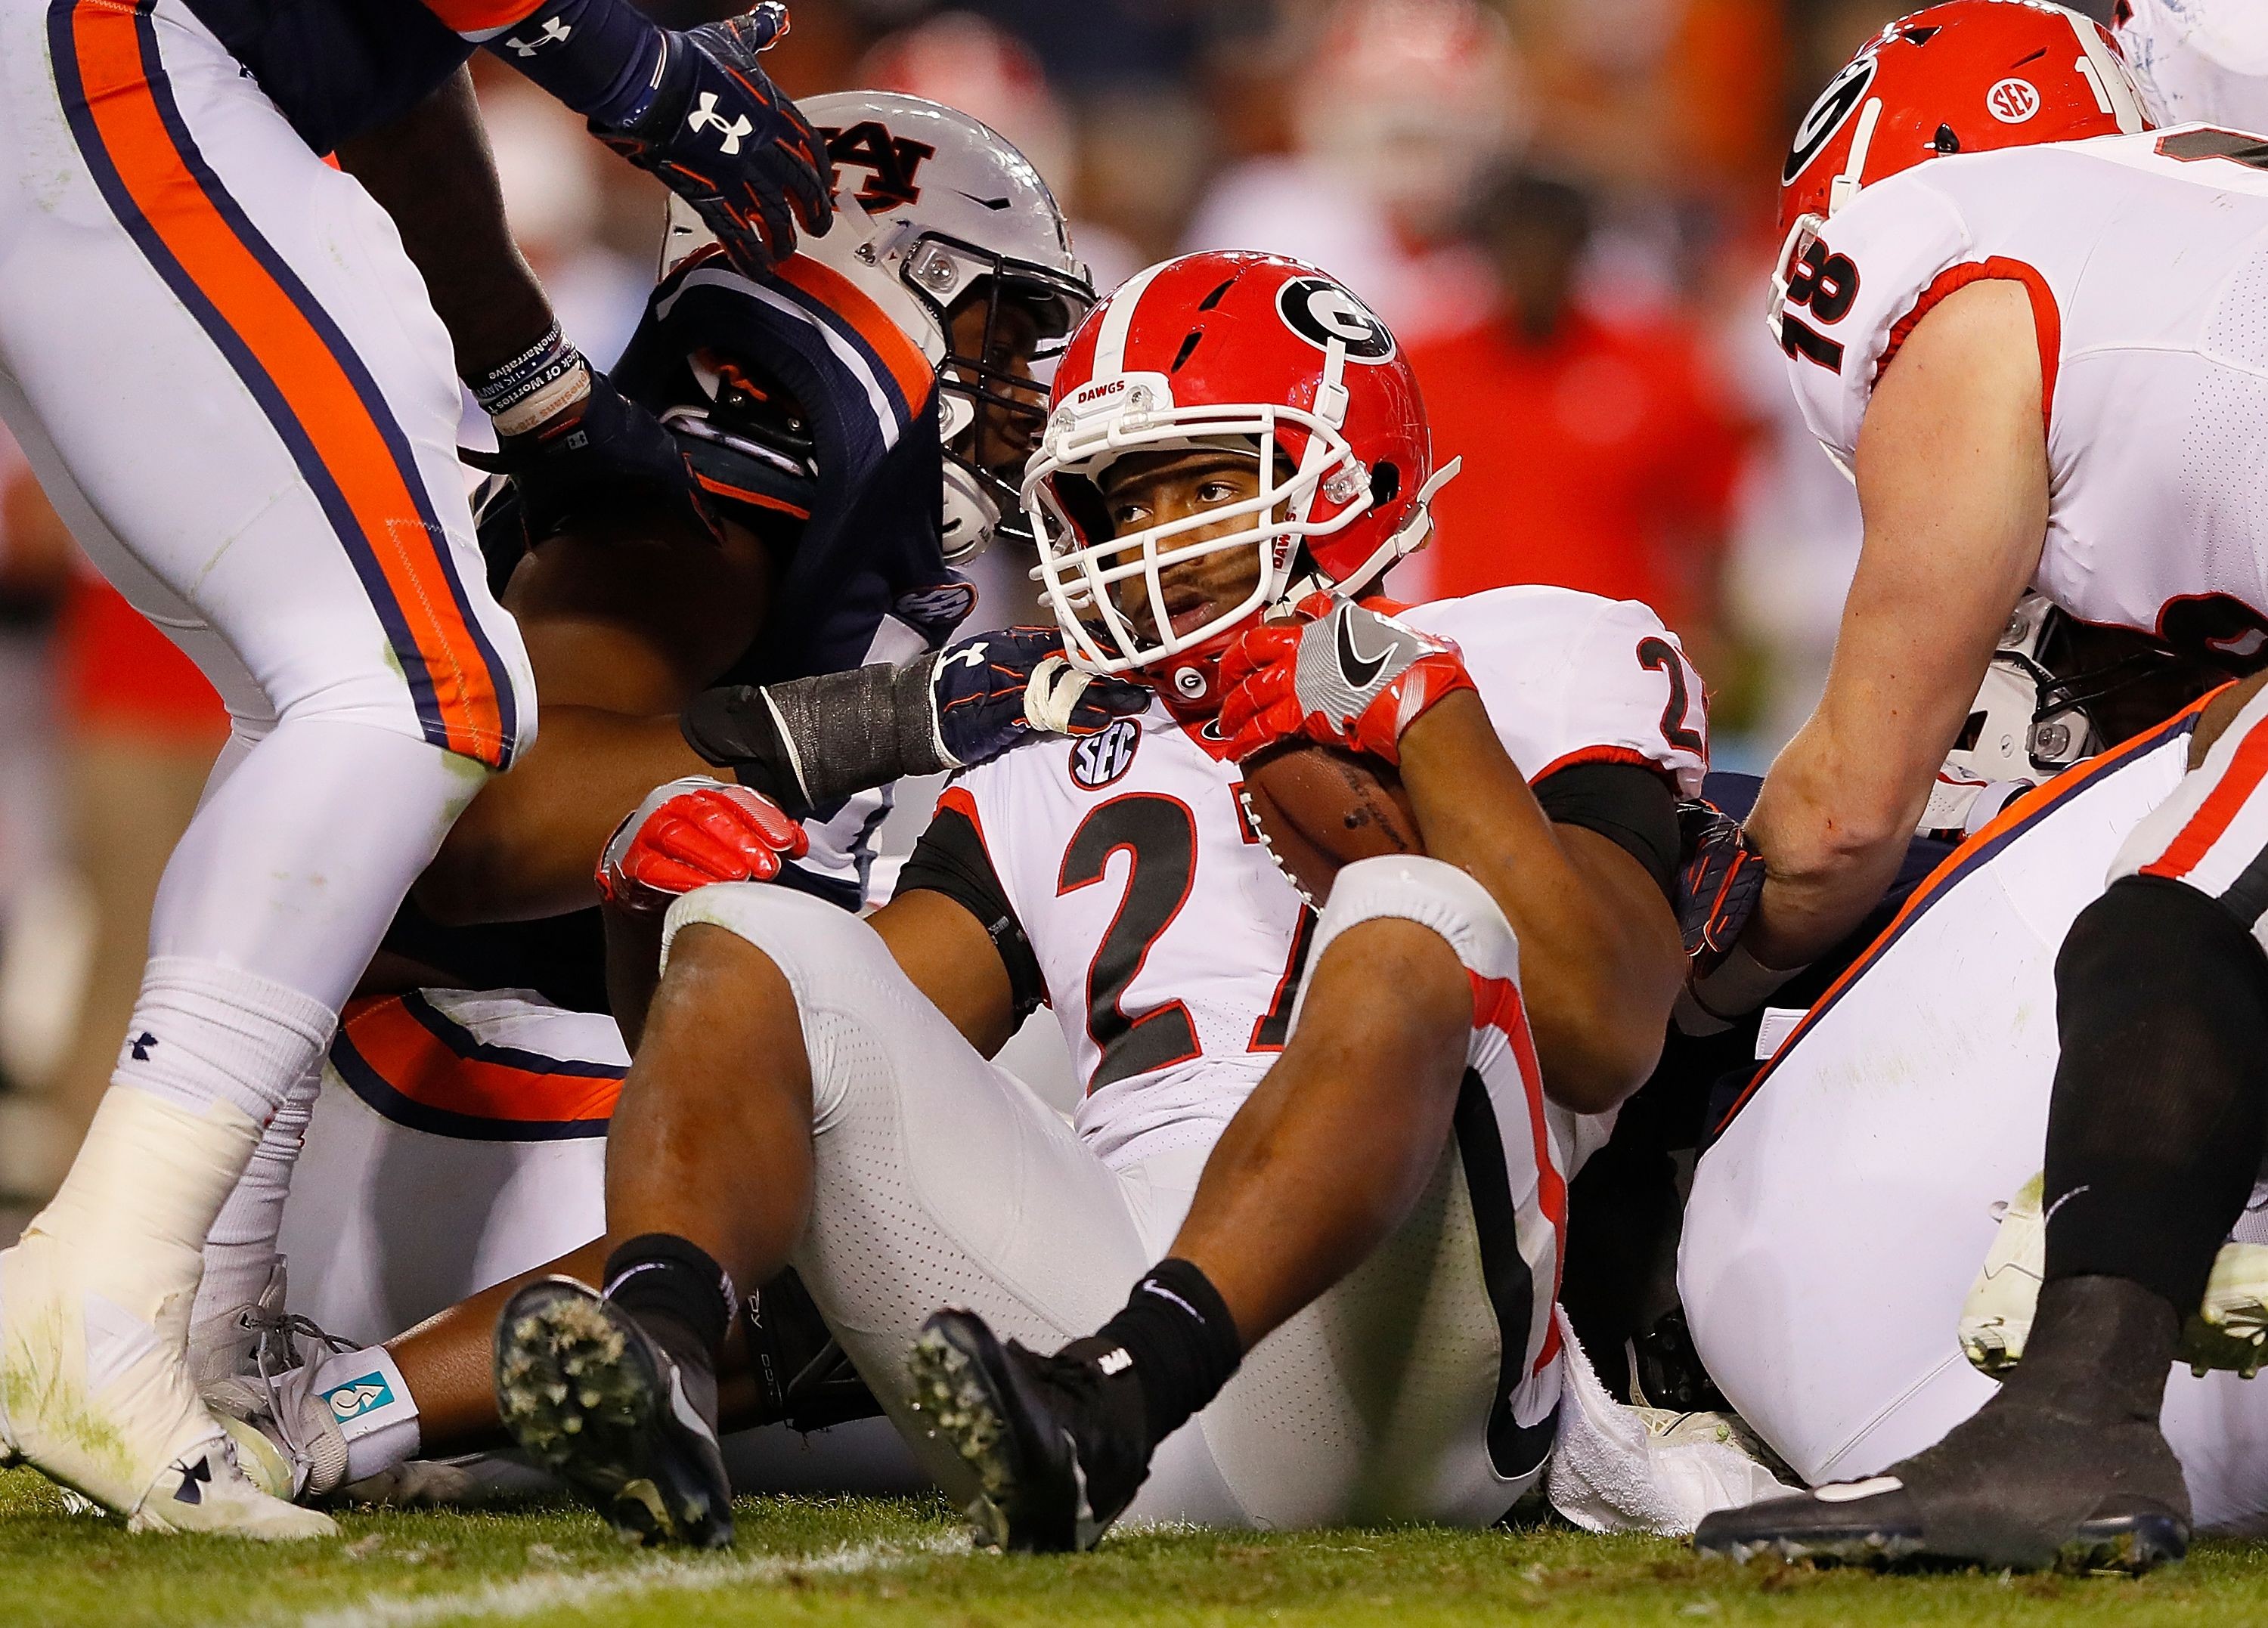 football falls back to Earth in loss to Auburn